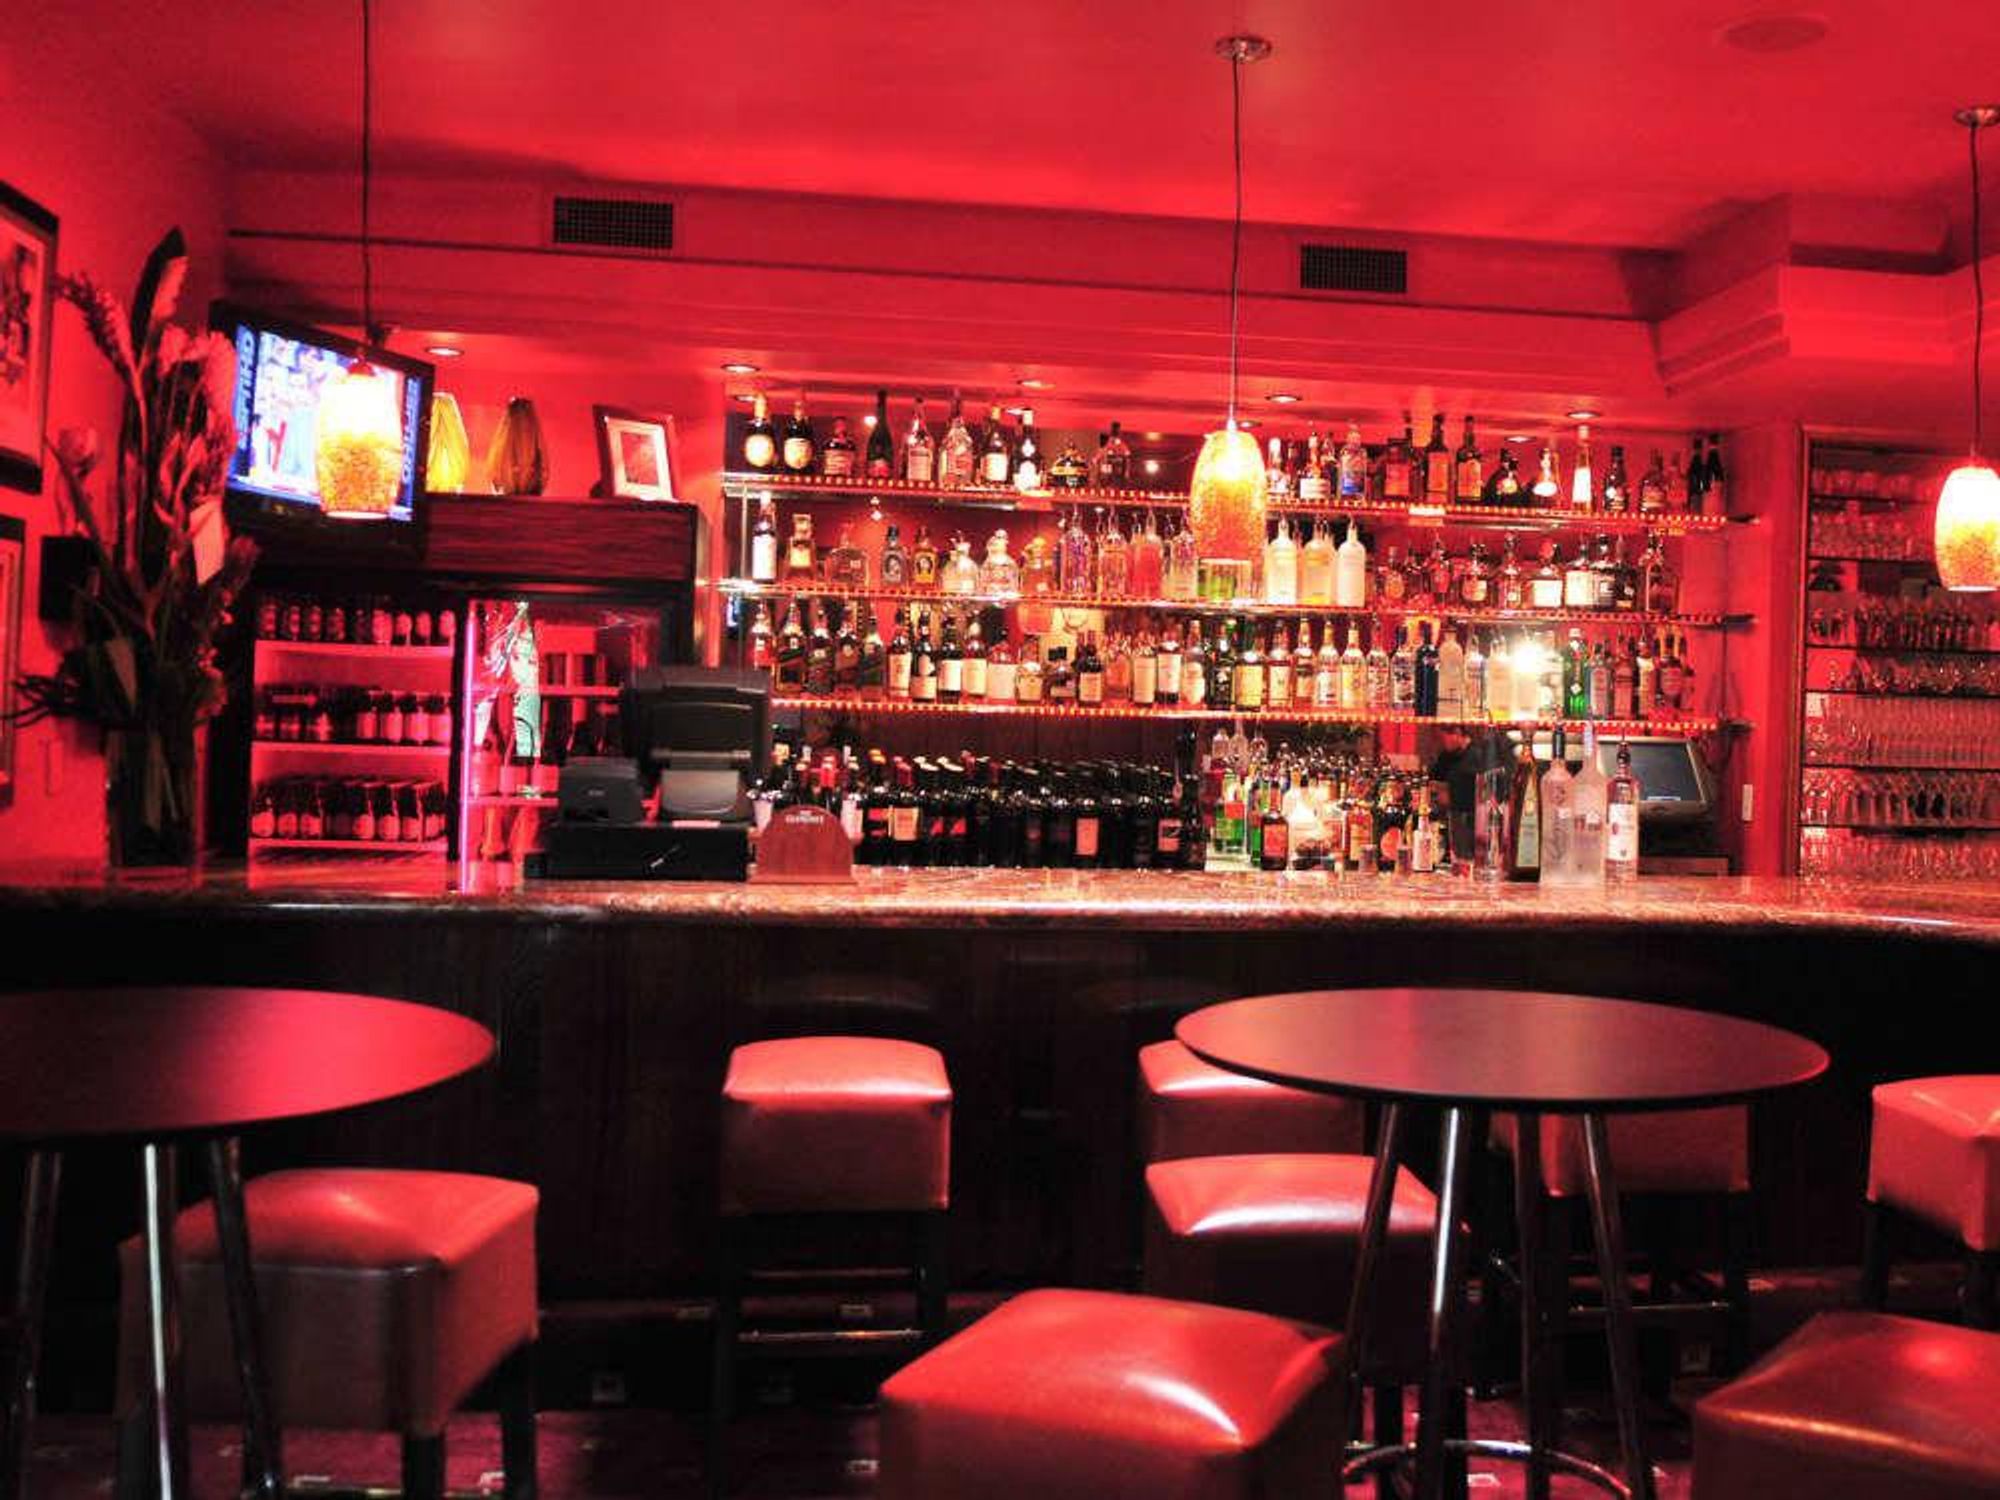 Places_Drinks_Red Room_interior_bar